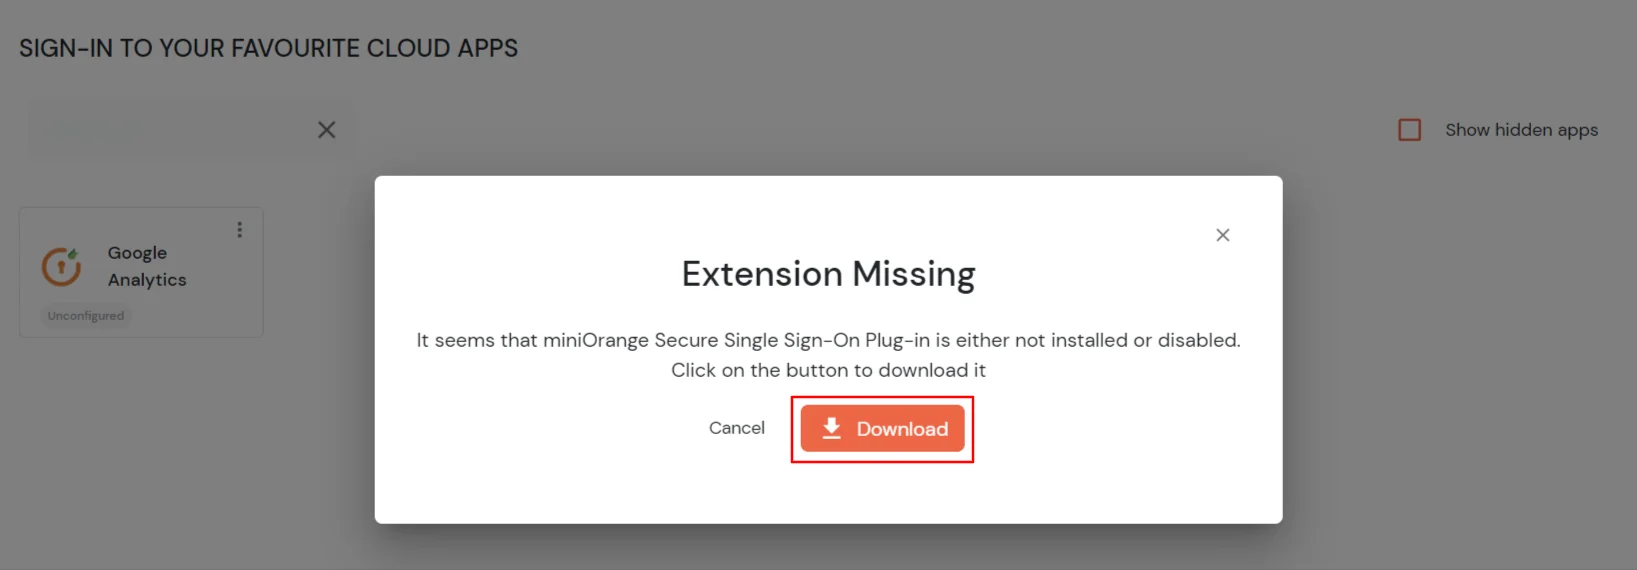 Google Analytics Single Sign-On (SSO) Download Extension 